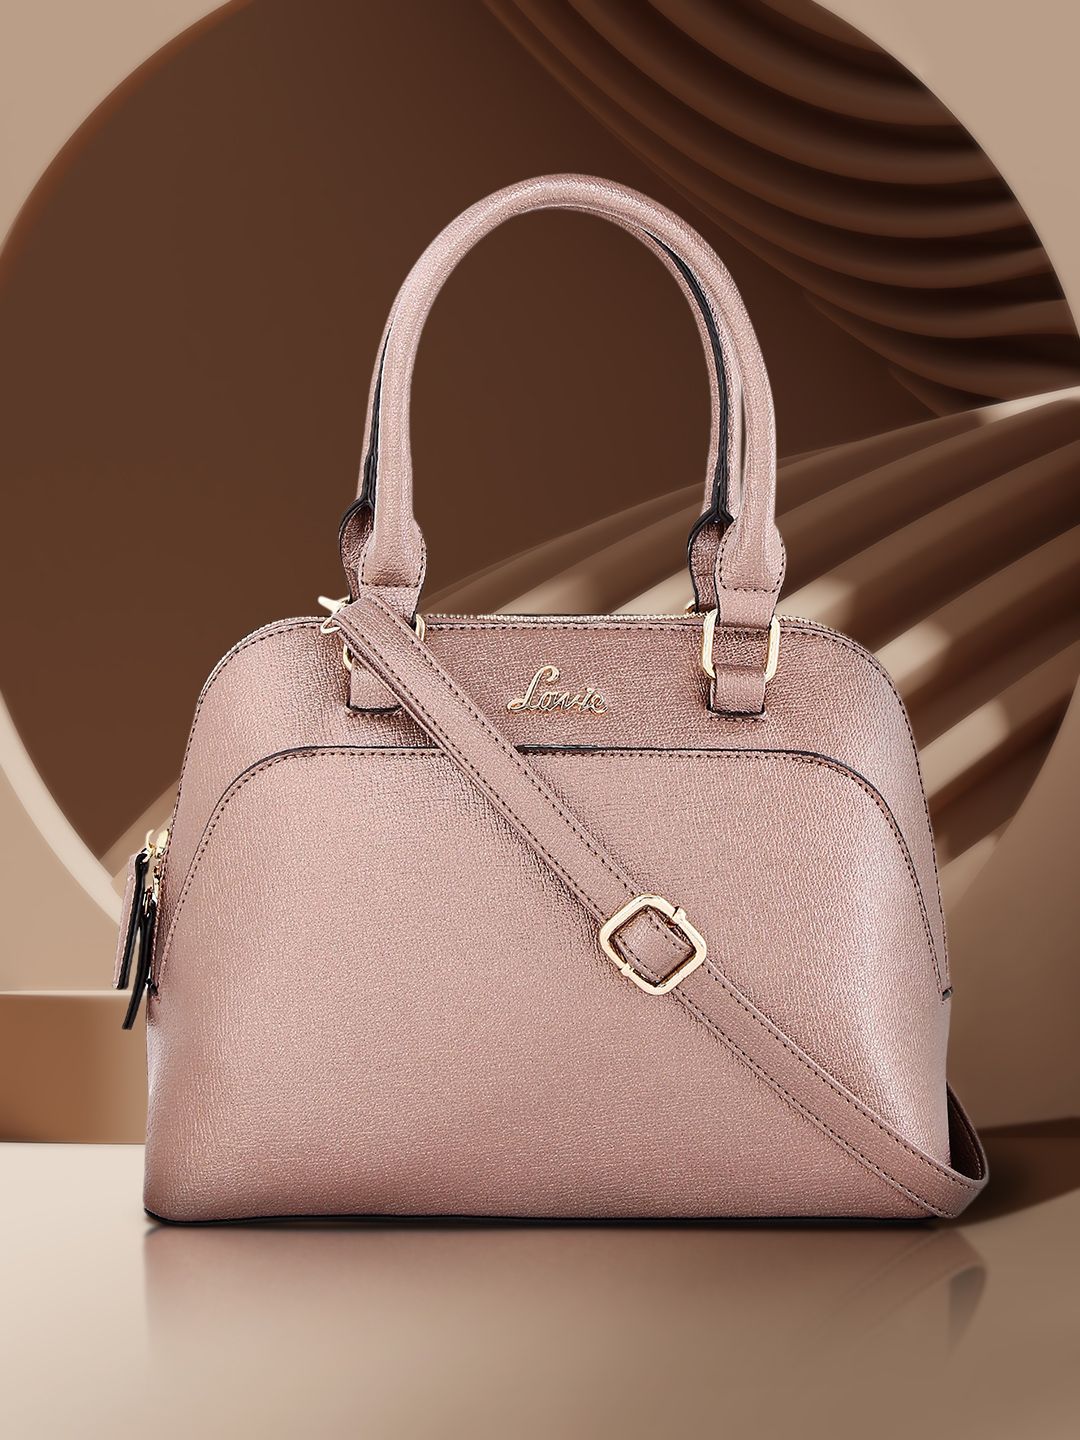 Lavie Rose Gold-Toned Solid Handheld Bag Price in India